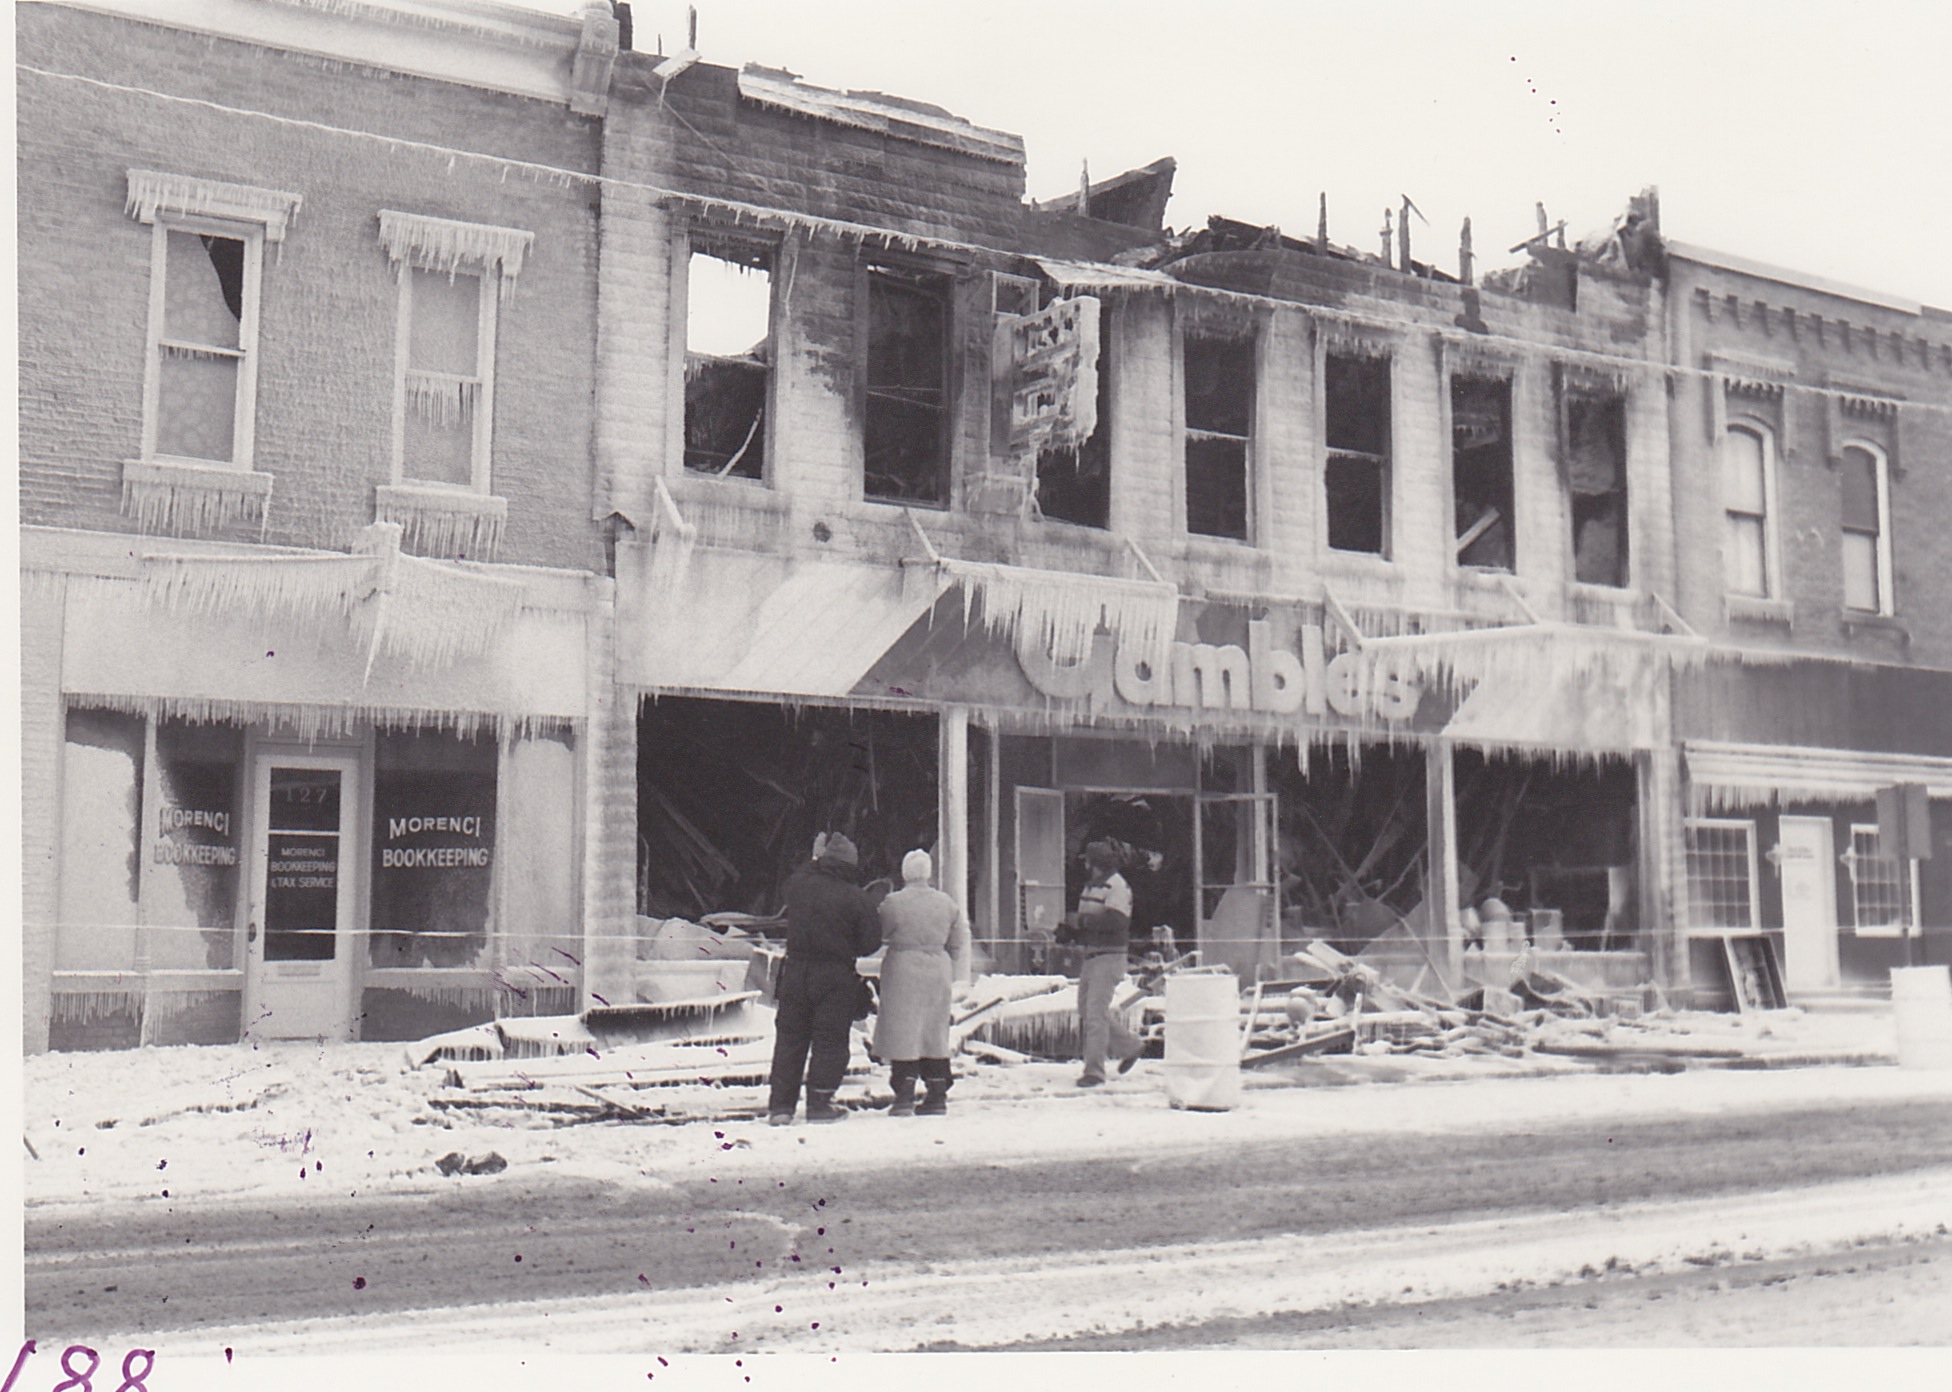 Gamble Store Fire, Jan 19, 1982.  Adam and Gail Johnson (owners) viewing damage the day following the fire.  Temperature was near zero.  Fire started by a burning candle in upstairs apartment.  Building owned by Kenneth Richardson.